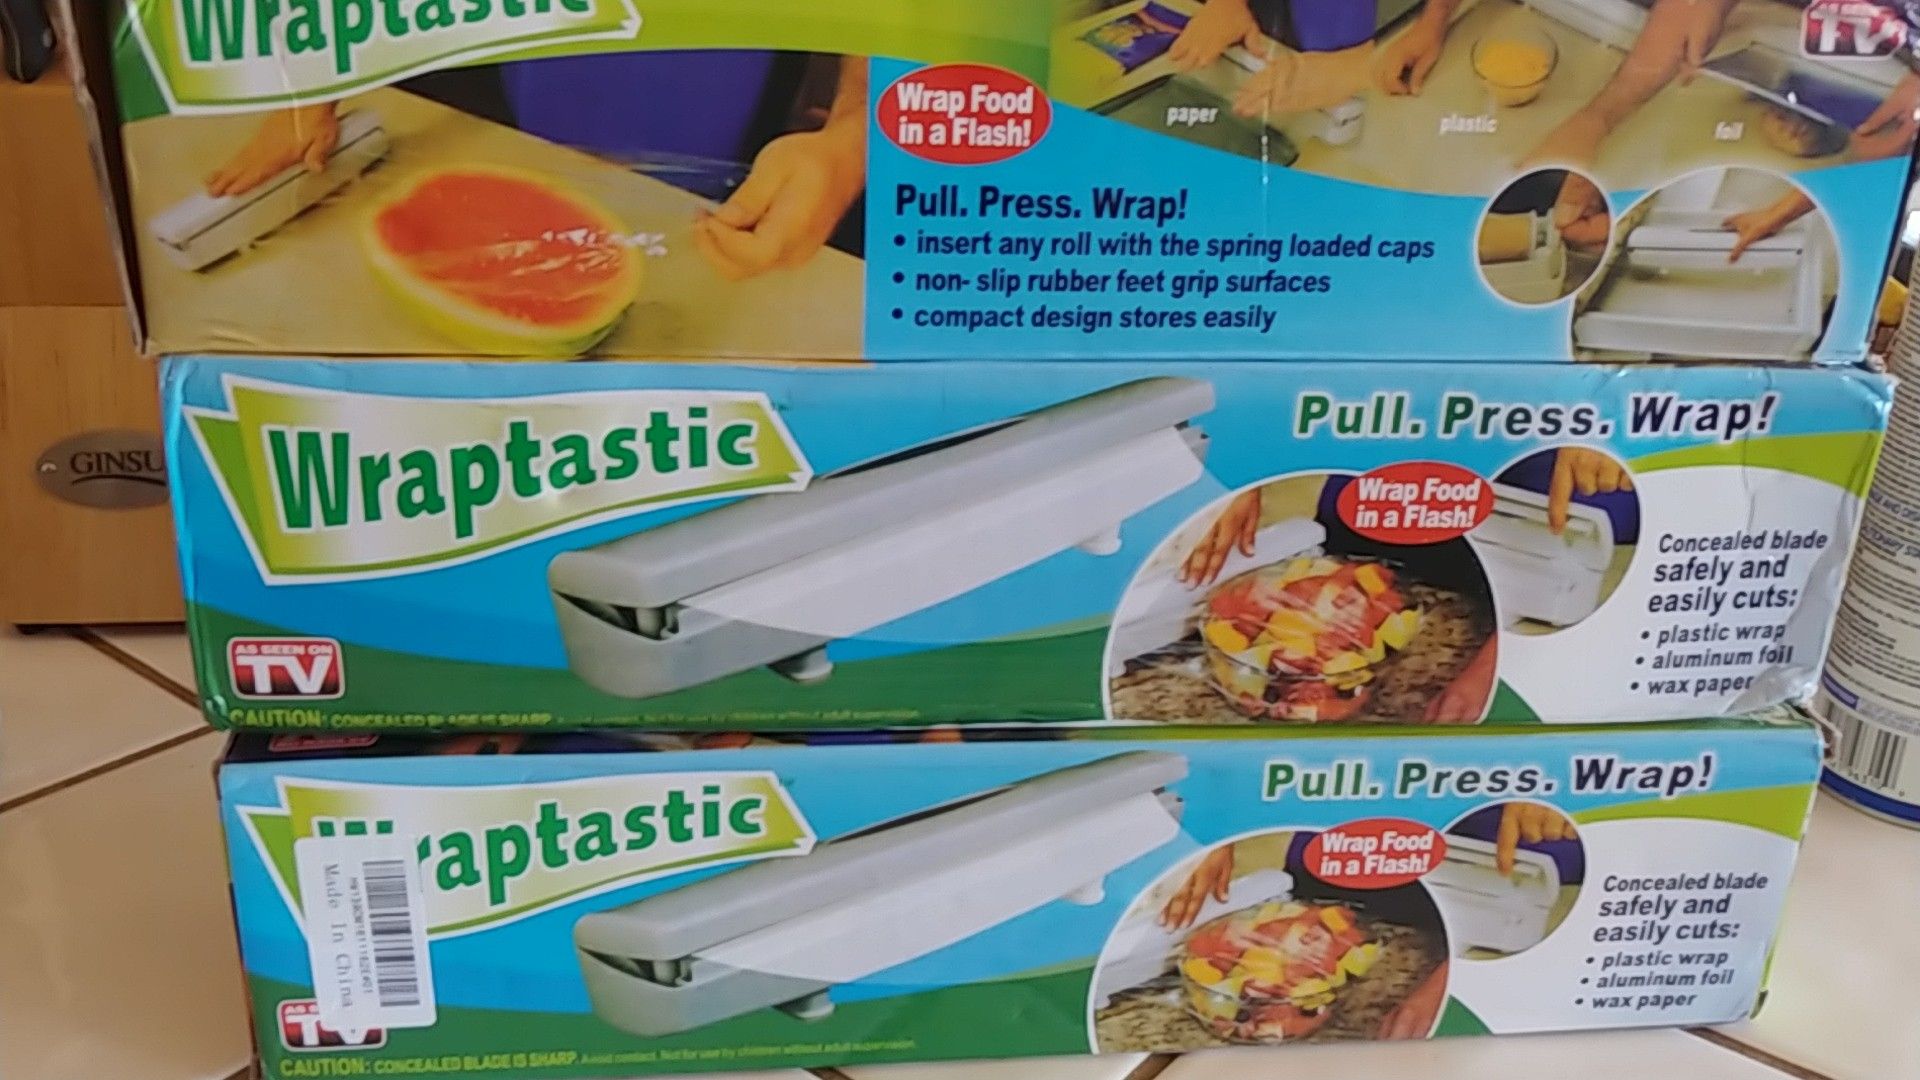 Brand new Wrap master for plastic, wax paper, and foil.